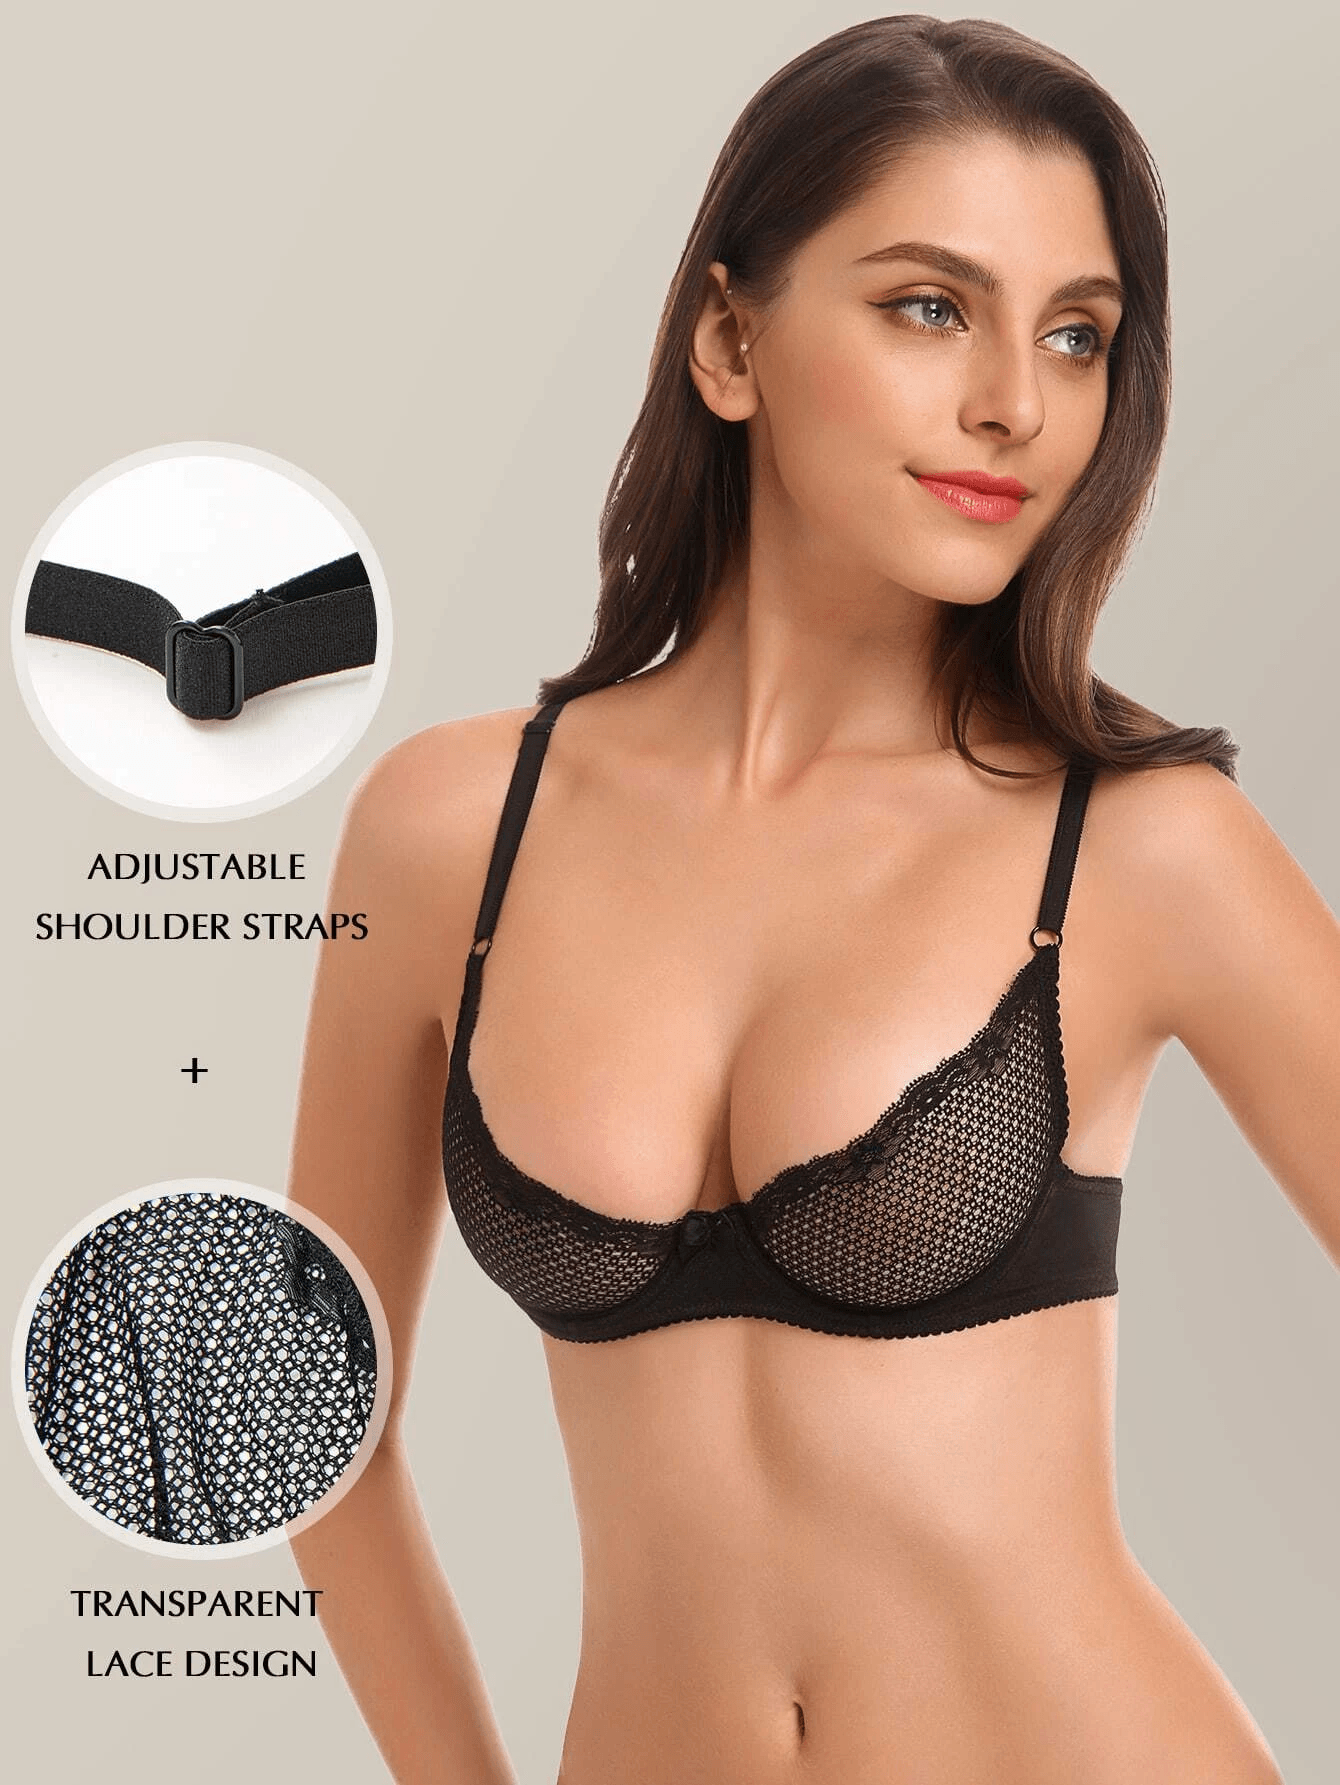 See Through Bra Sexy 1/2 Cup Lace Mesh Demi Bra 4 Colors – WingsLove